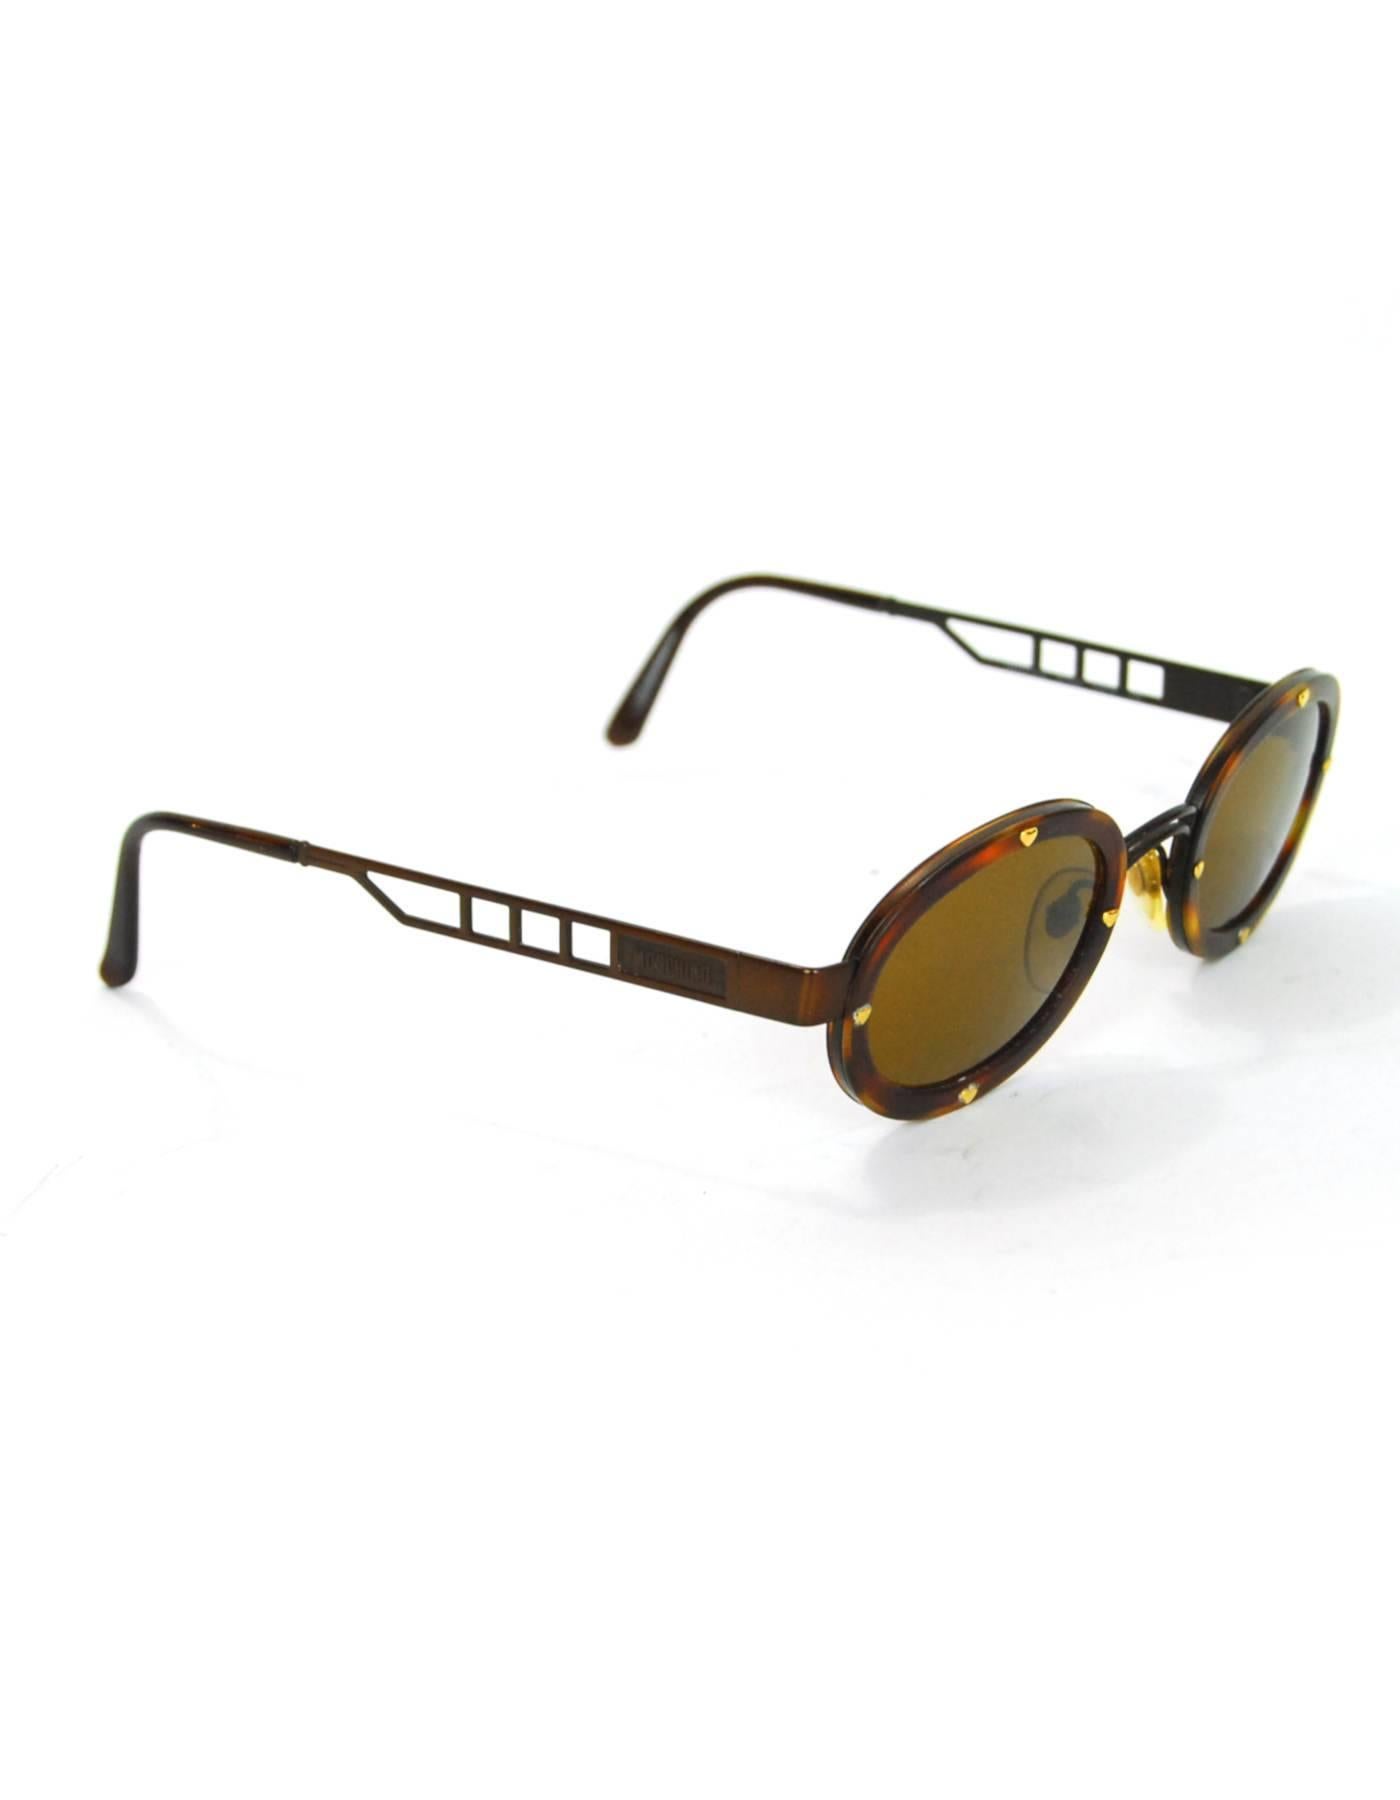 Moschino Vintage Brown Sunglasses
Features small goldtone hearts

Made In: Italy
Color: Brown
Materials: Resin, metal
Overall Condition: Excellent vintage pre-owned condition with the exception of some surface marks
Included: Moschino